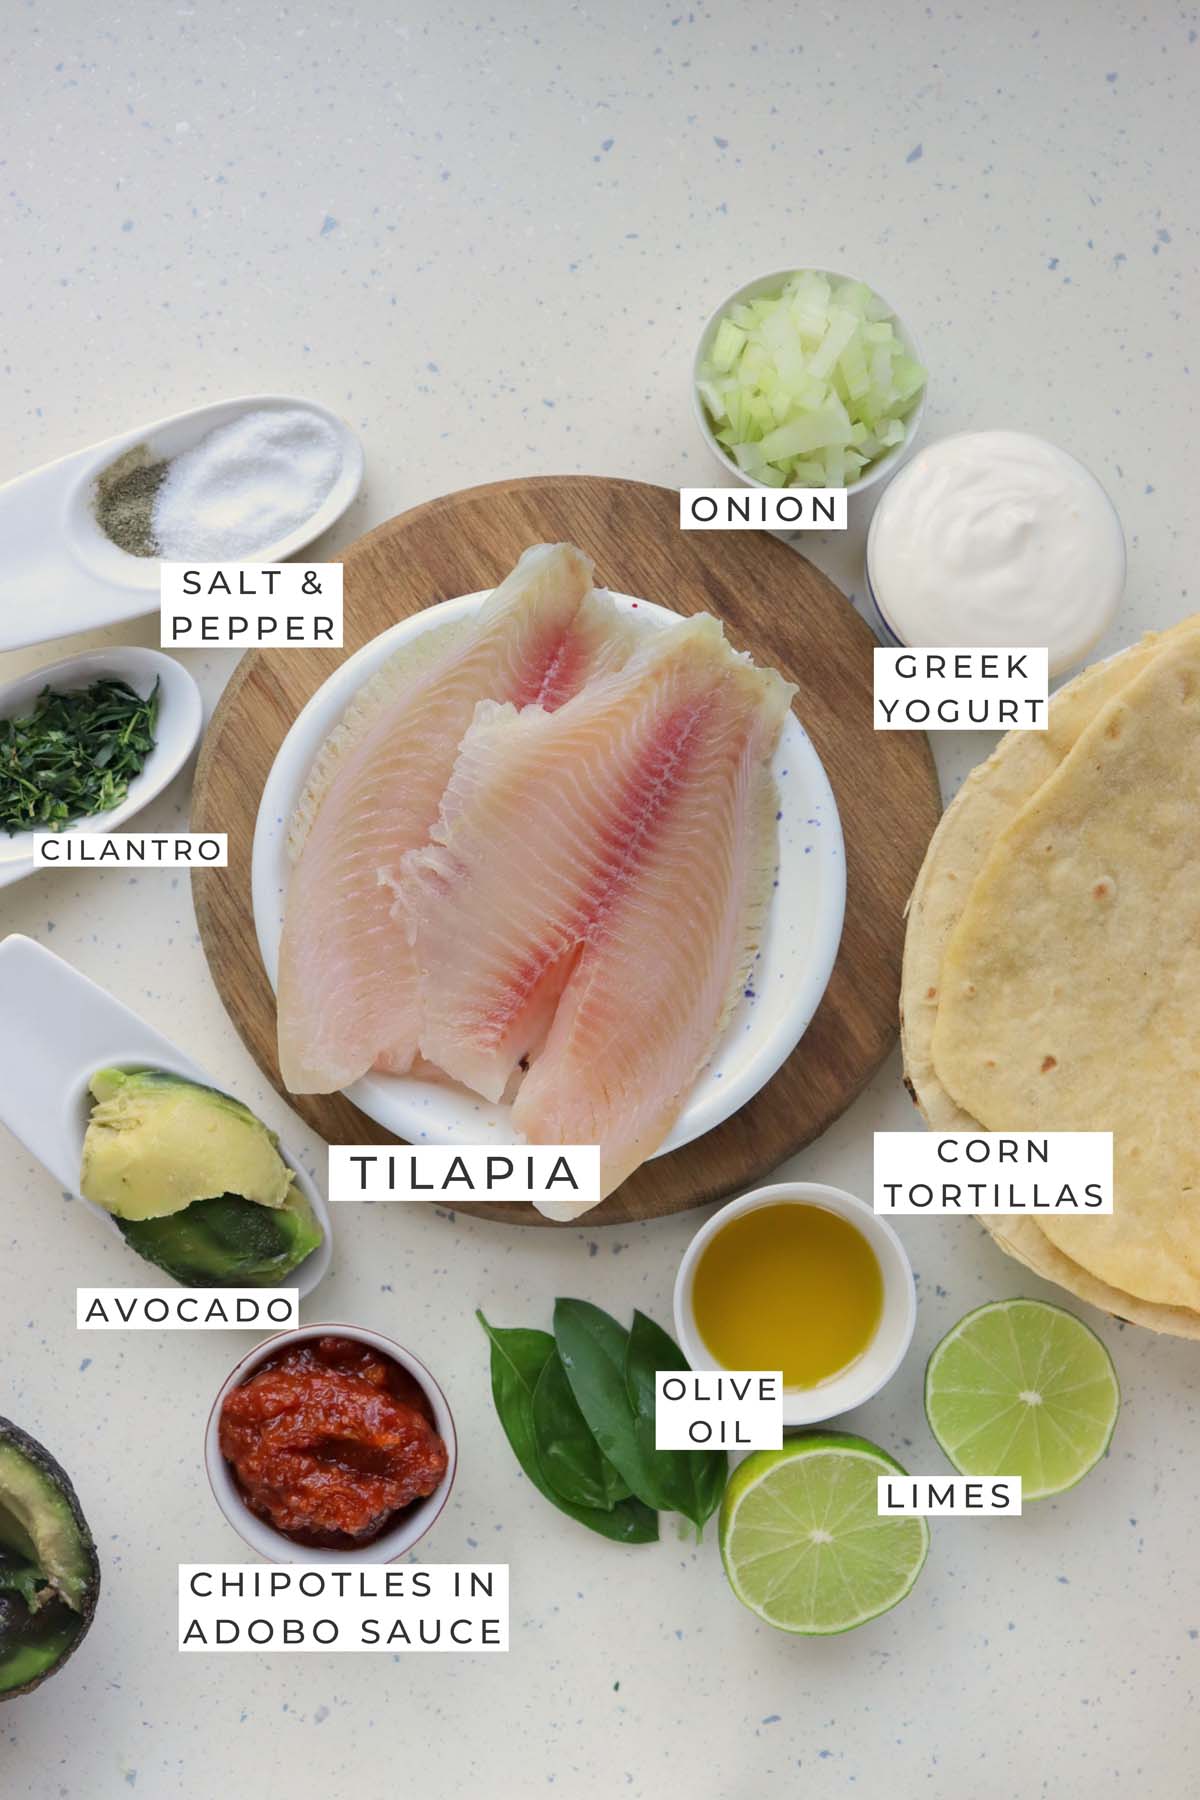 Labeled ingredients for the fish tacos.